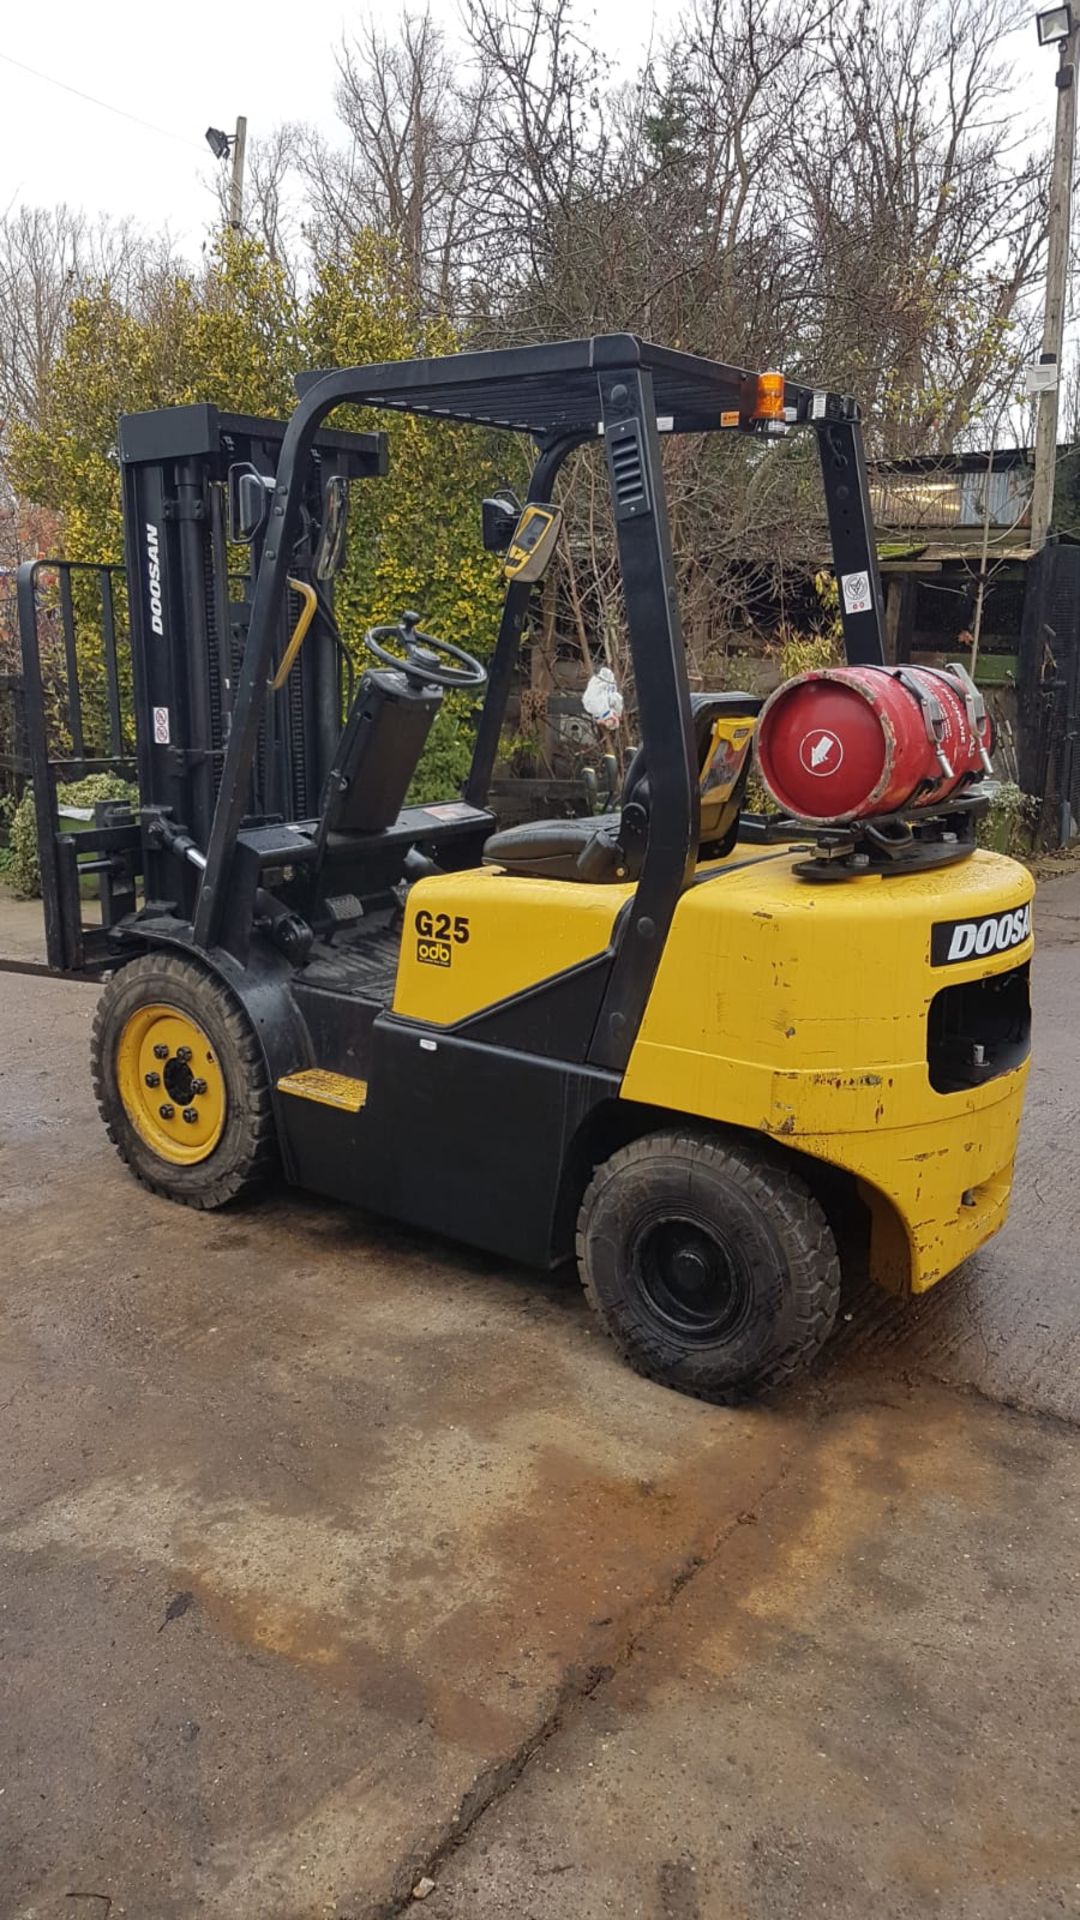 DAEWOO G25 GAS POWERED FORKLIFT TRUCK, 3 STAGE TRIPLE MAST, SIDE SHIFT, 2.5 TONNE RATED CAPACITY.